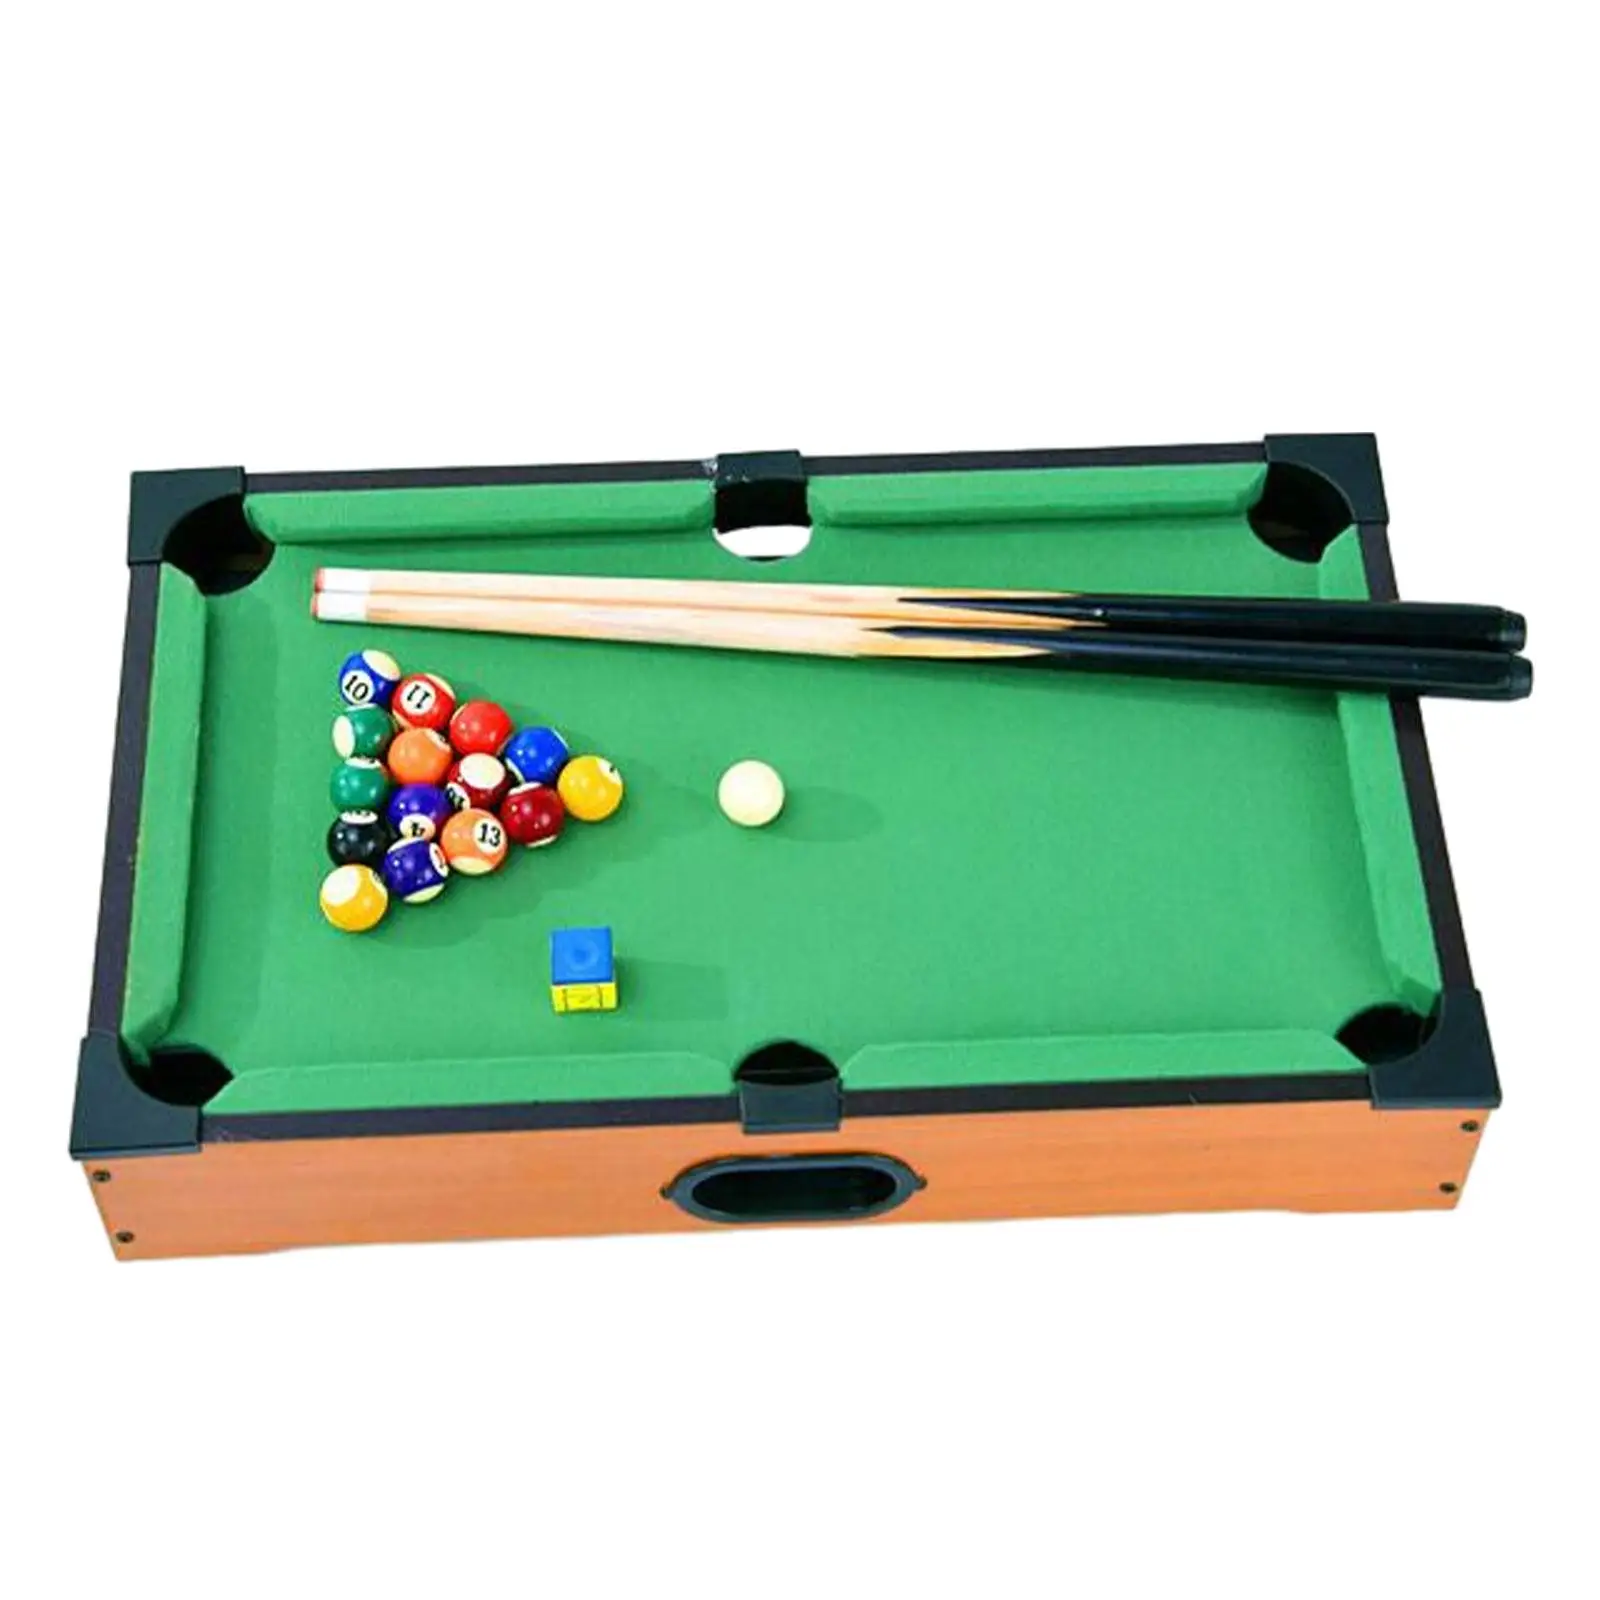 Mini Table Pool Set Snooker Home Play with Game Balls Easily Set Billiards Playset for Office Desk Indoor Playroom